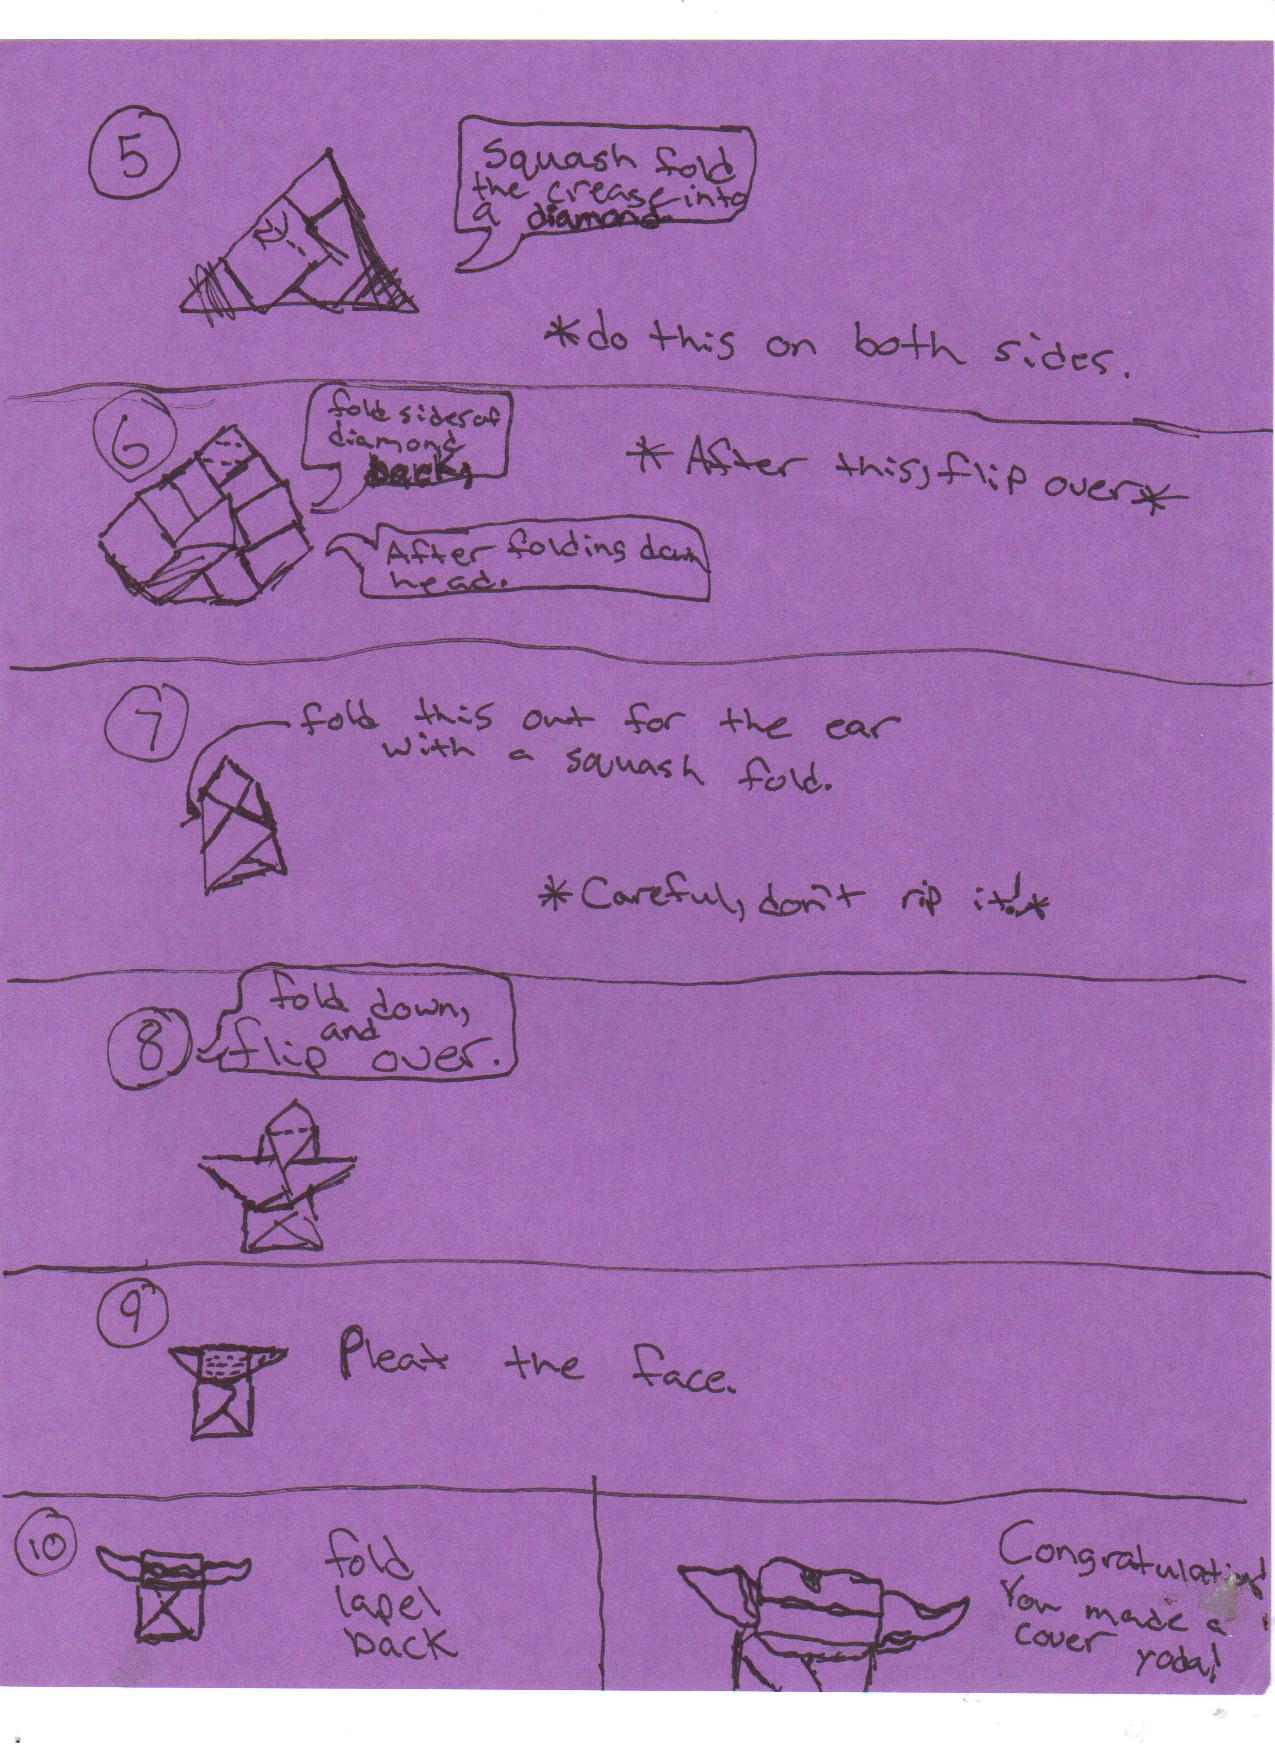 origami yoda instructions from the cover